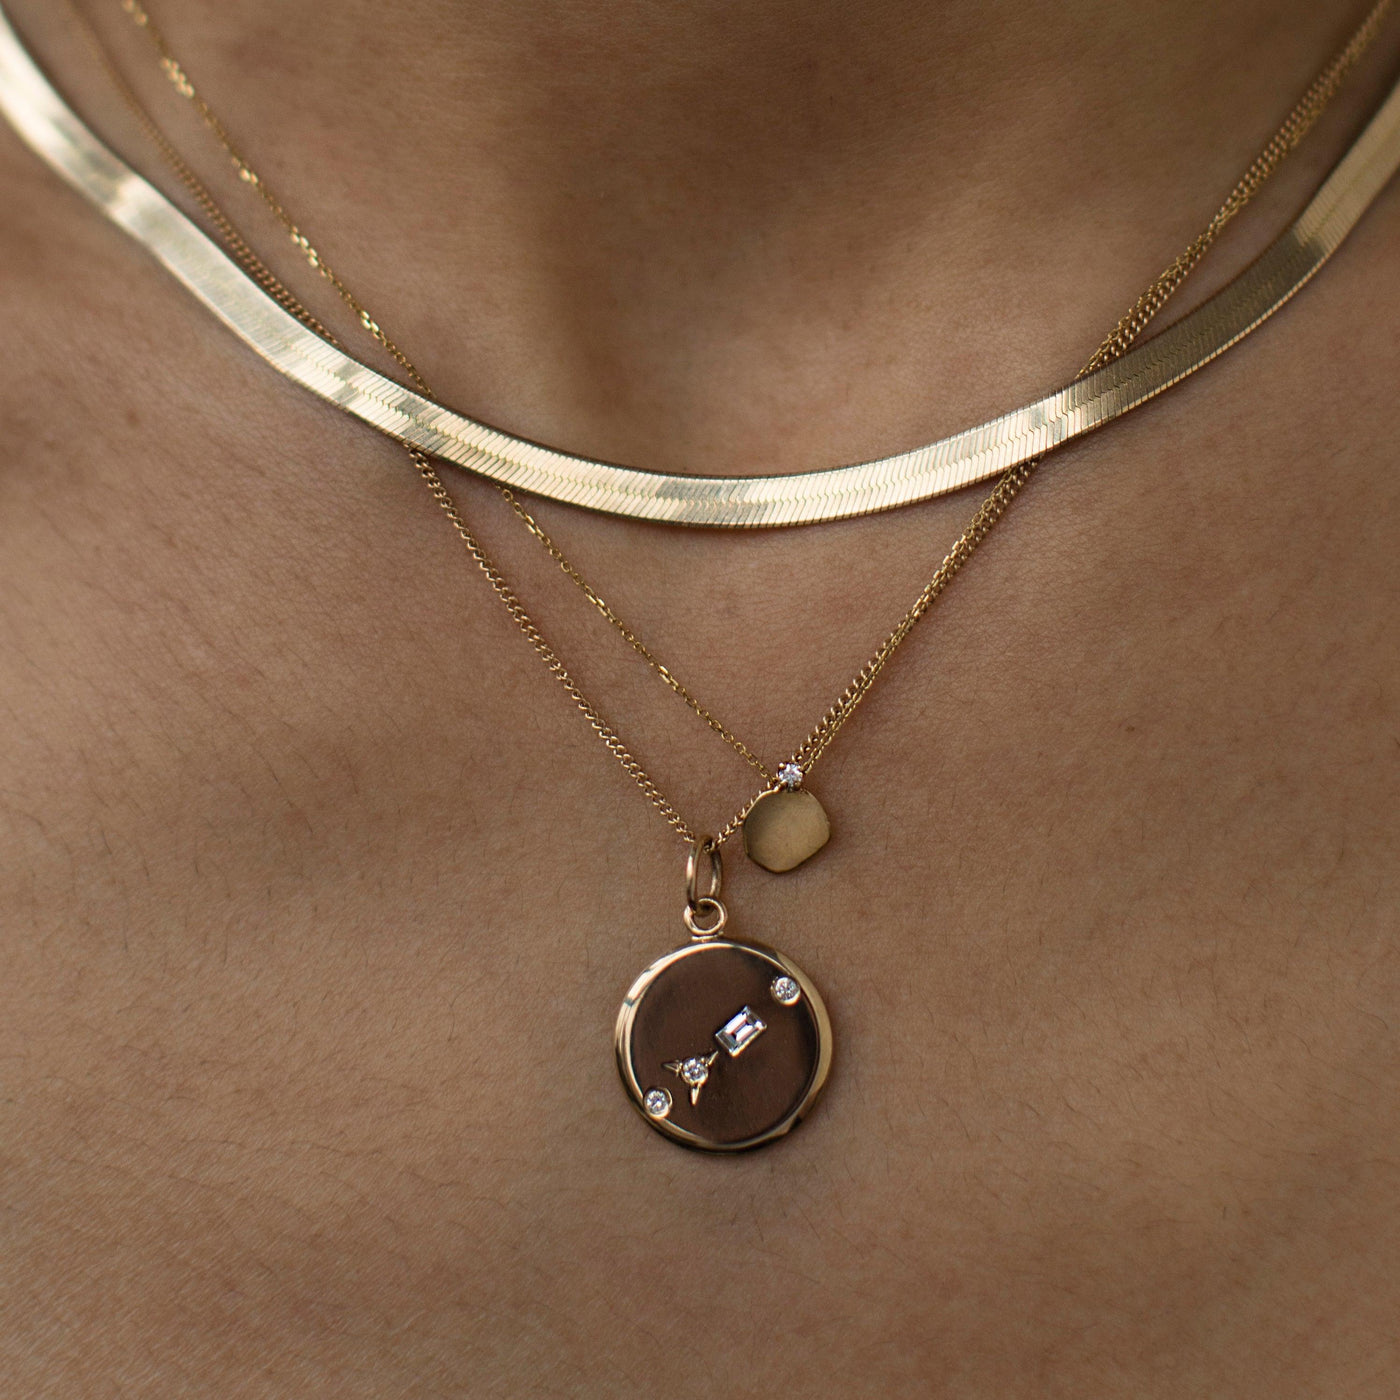 Small Medallion Baguette Necklace - WWAKE